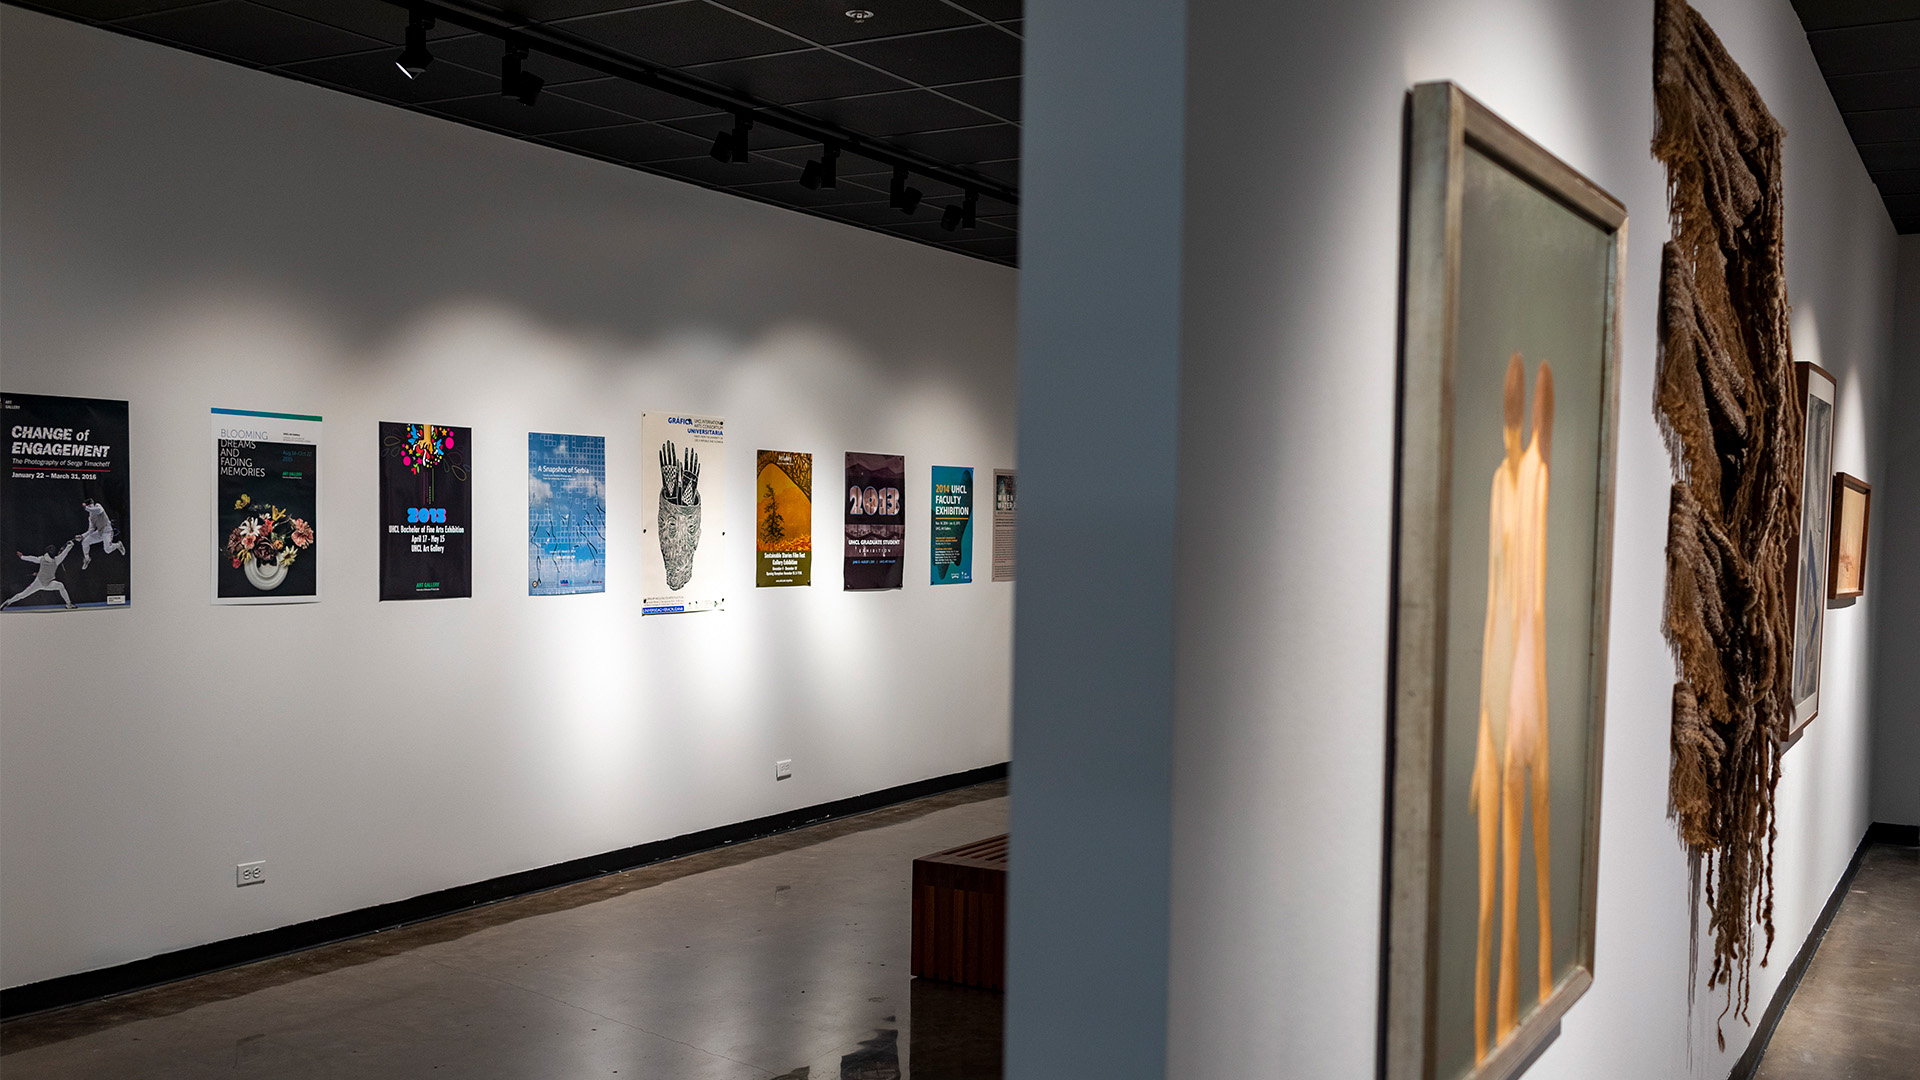 UHCL Art Gallery exhibits its own collection, features Judy Chicago works